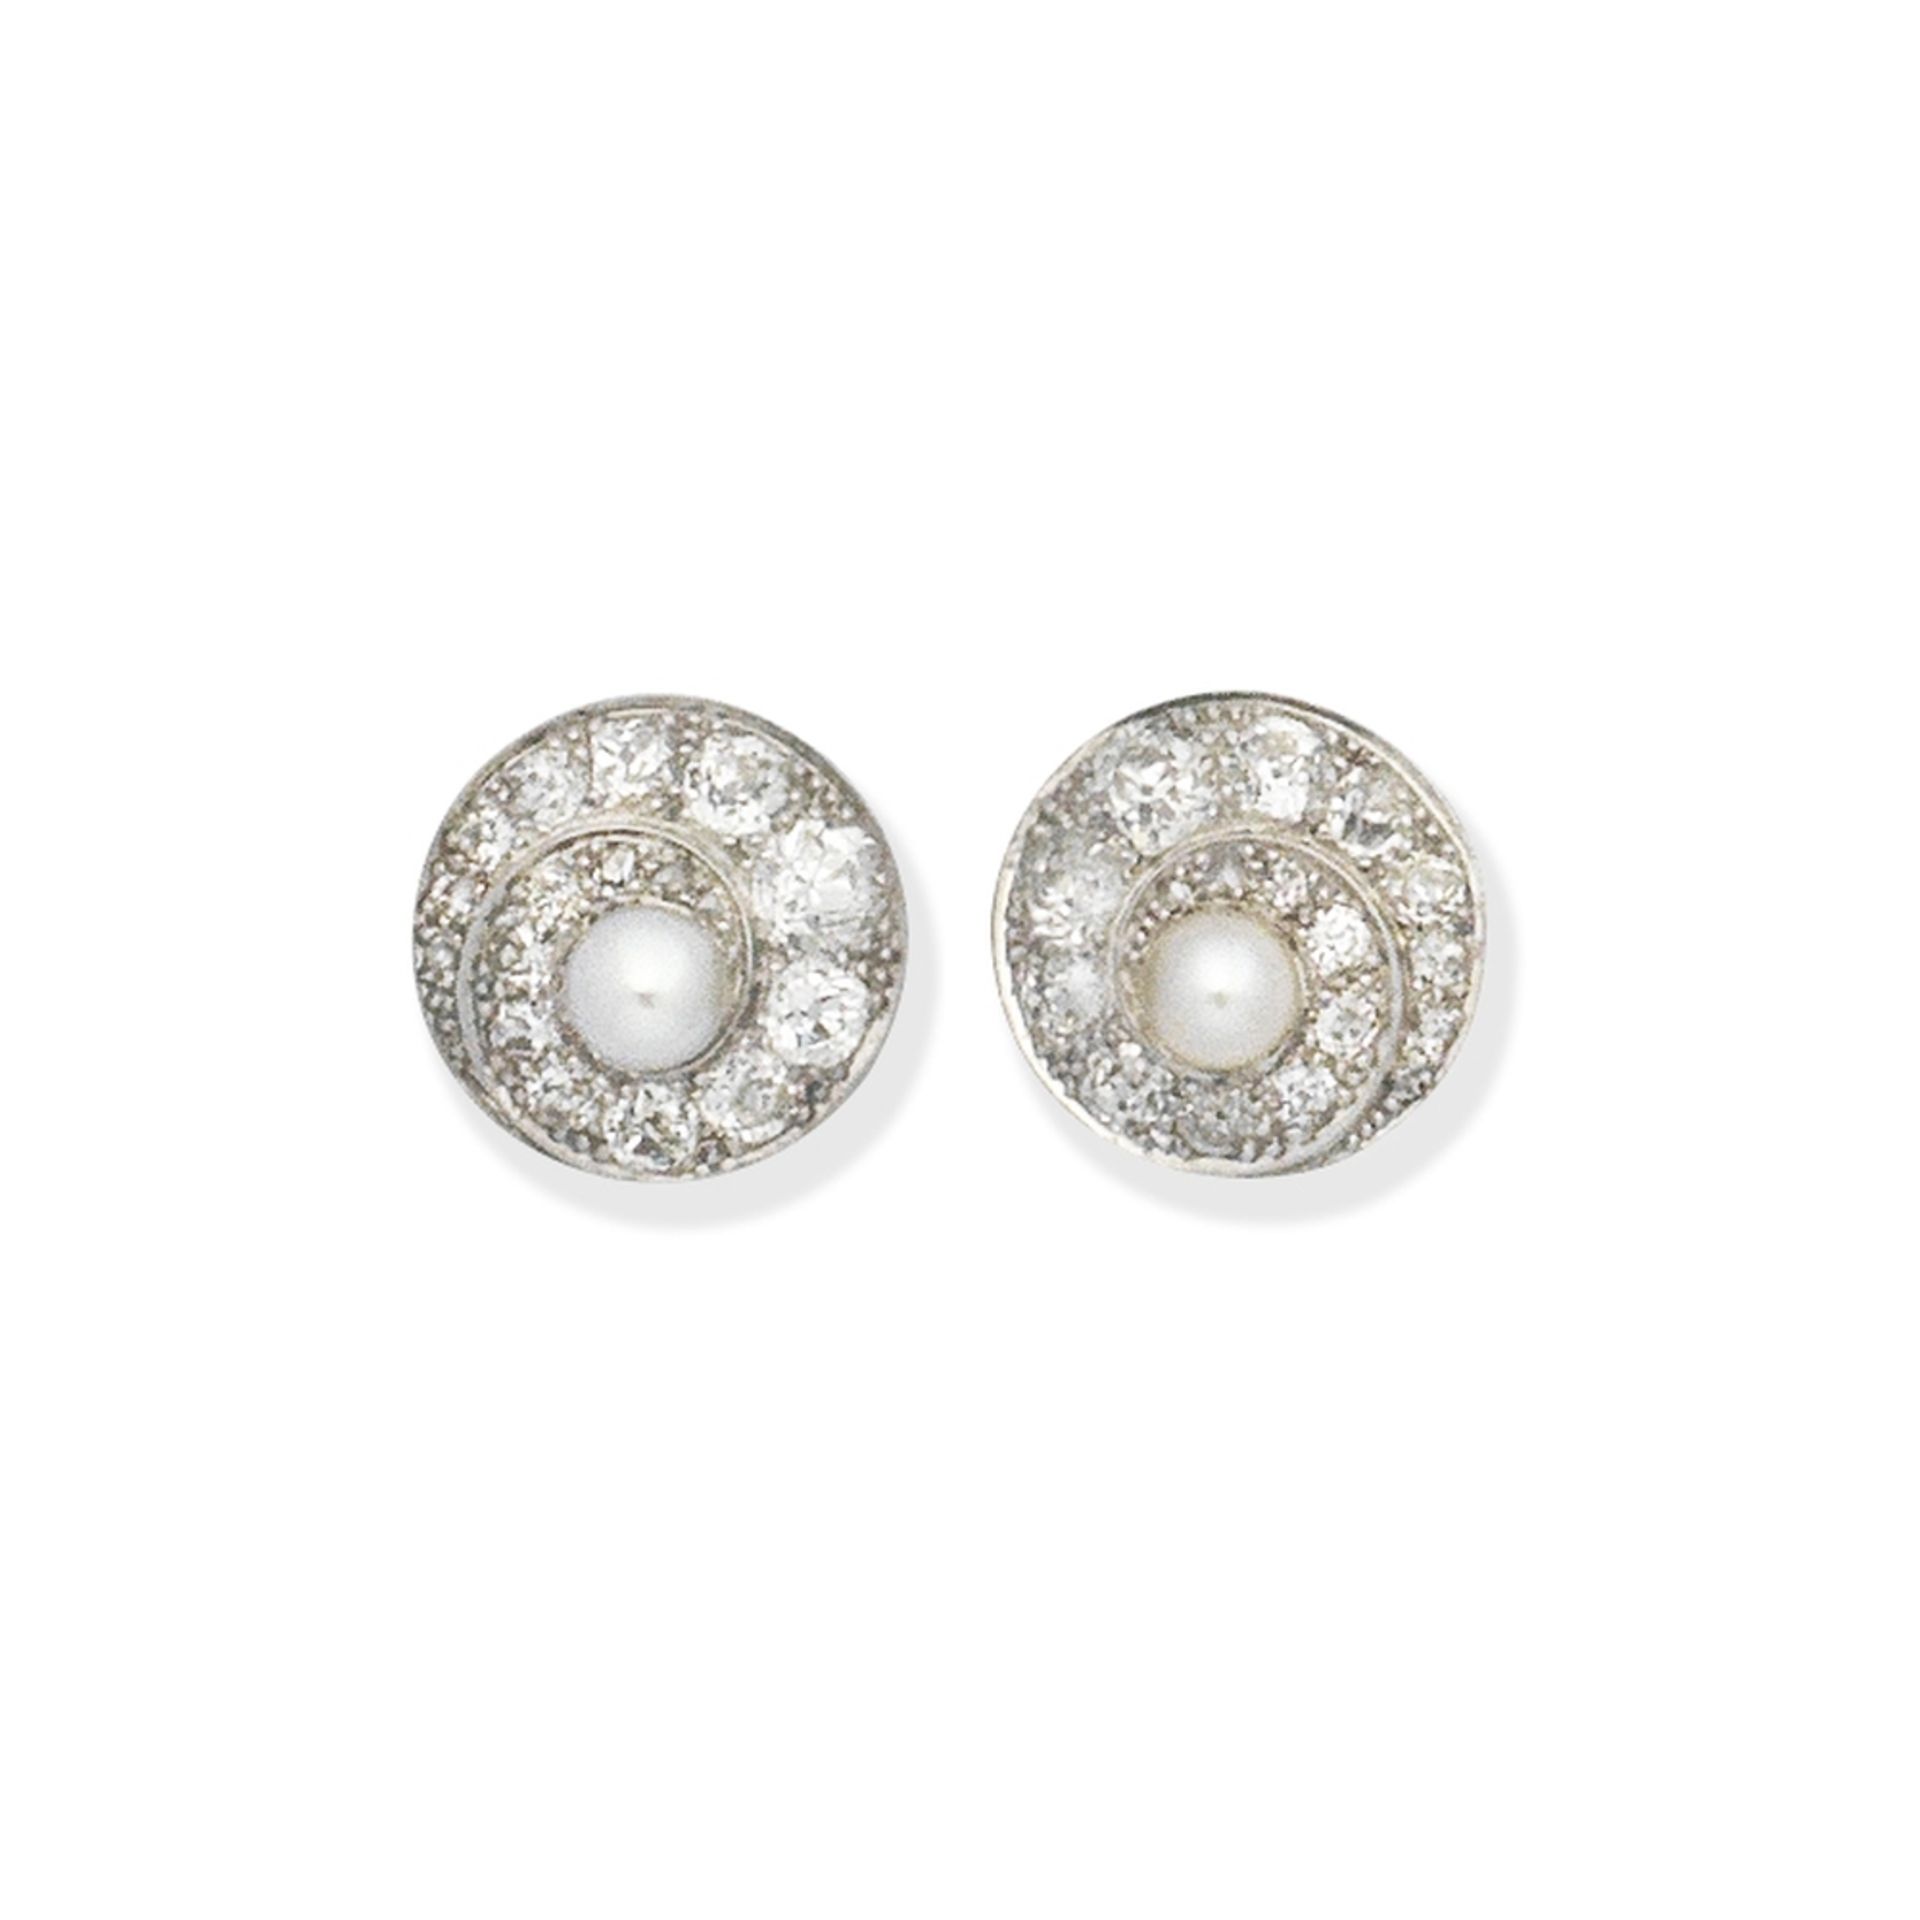 Cultured pearl and diamond earclips